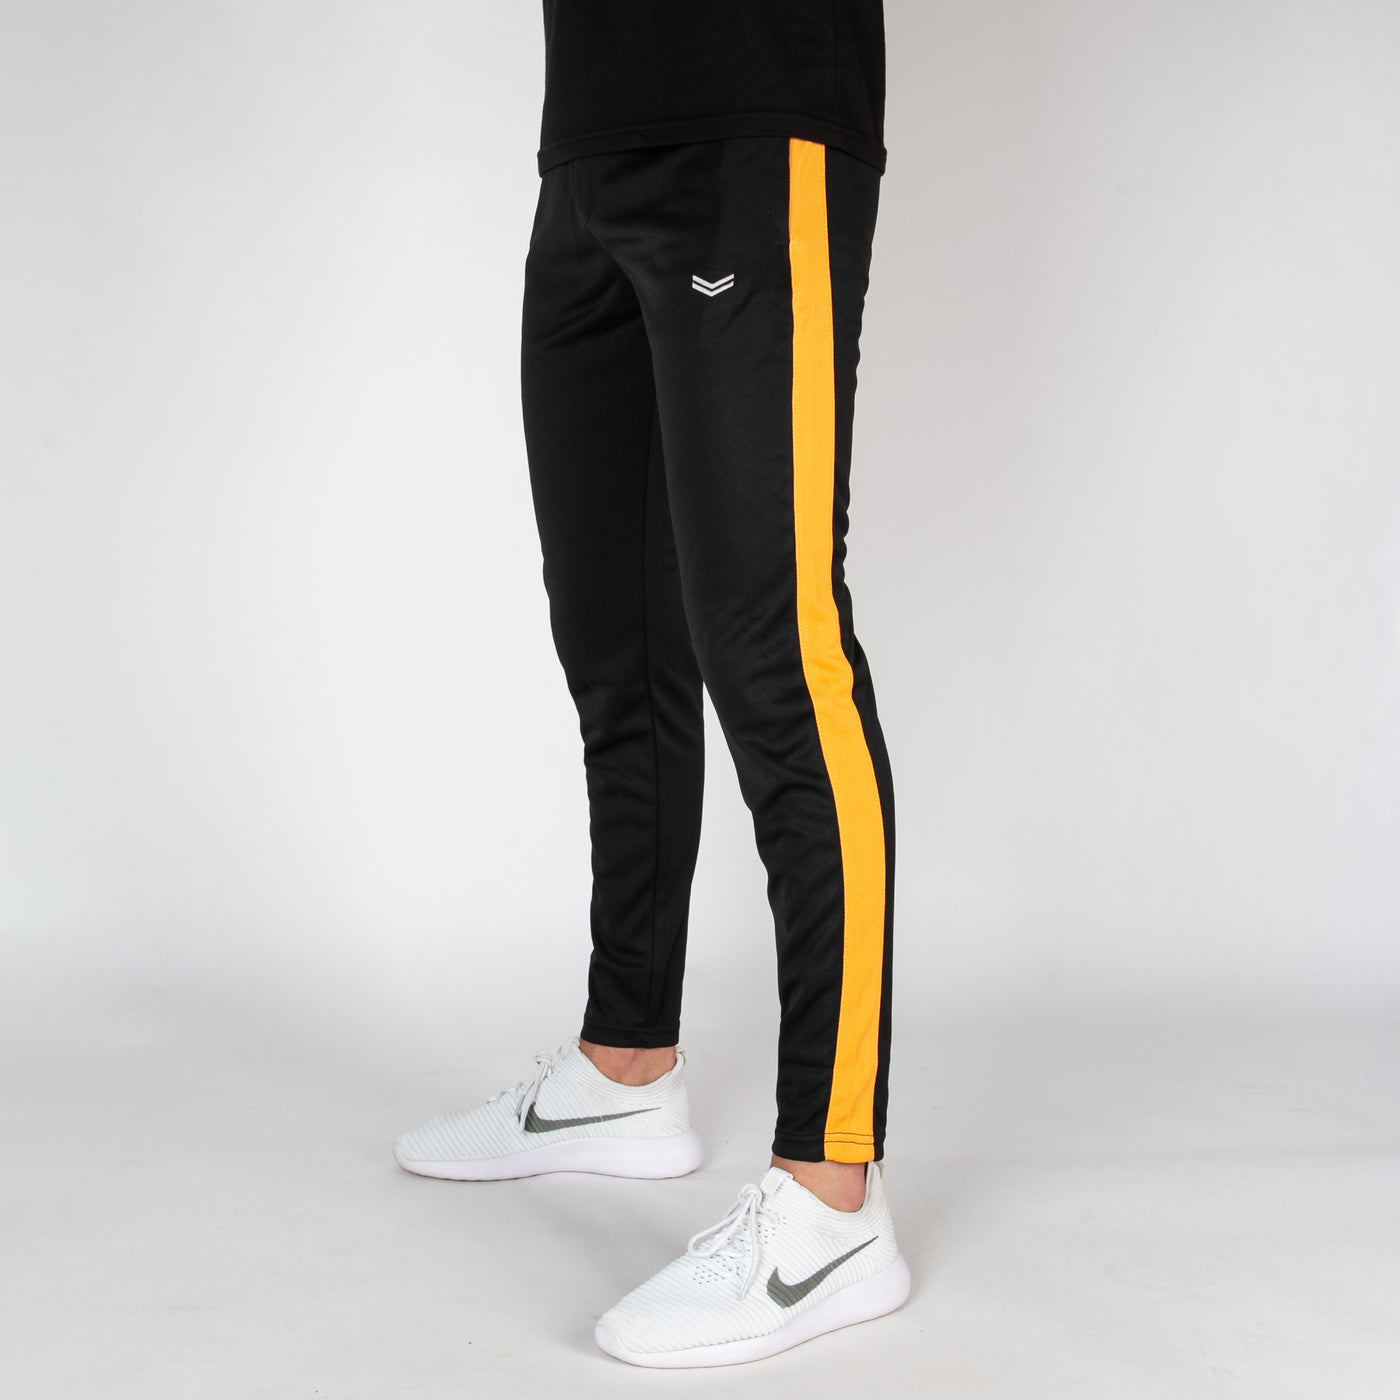 Black Quick Dry Hybrid Bottoms with Mustard Mesh Panels